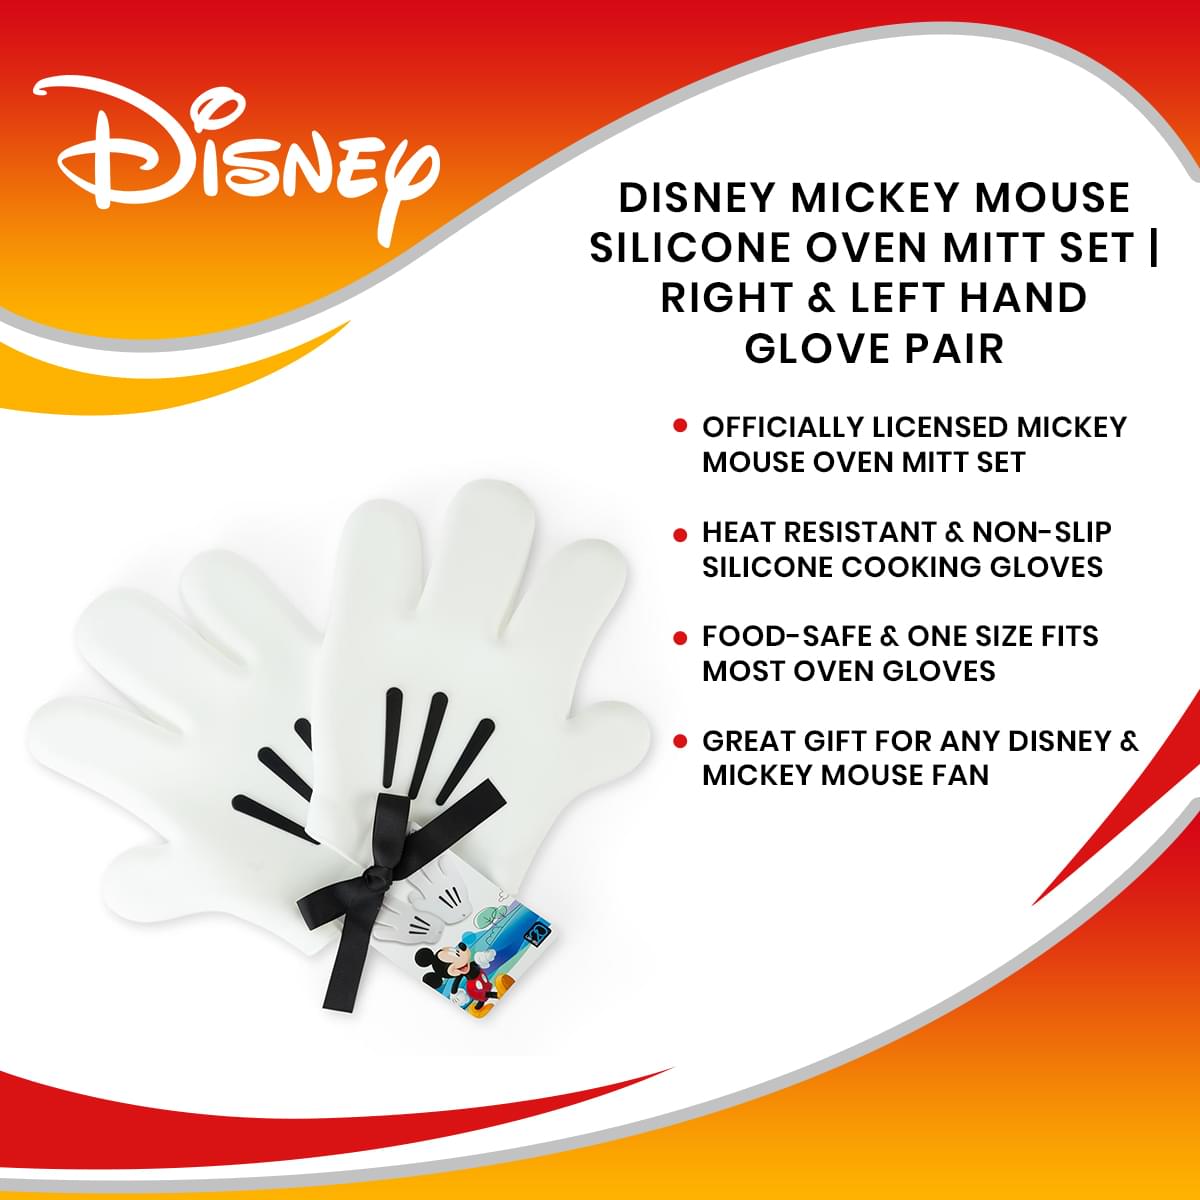 Disney Mickey Mouse Silicone Oven Mitt Set | Right & Left Hand Glove Pair